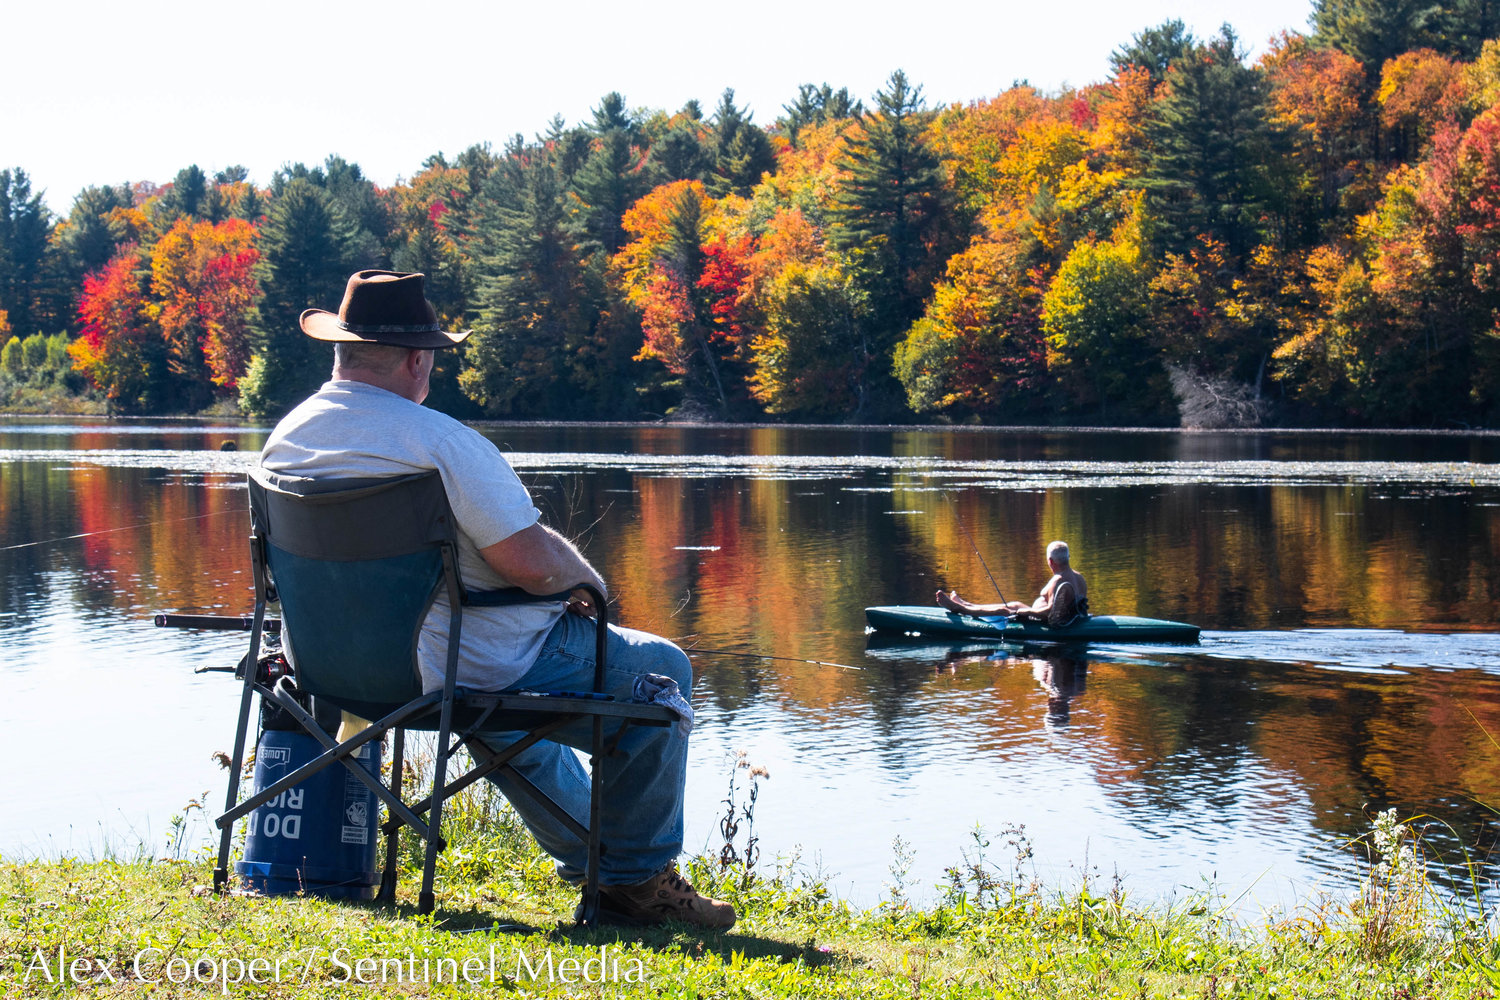 A kayaker paddles by as a man fishes at Forestport Reservoir on Wednesday, Oct. 5.